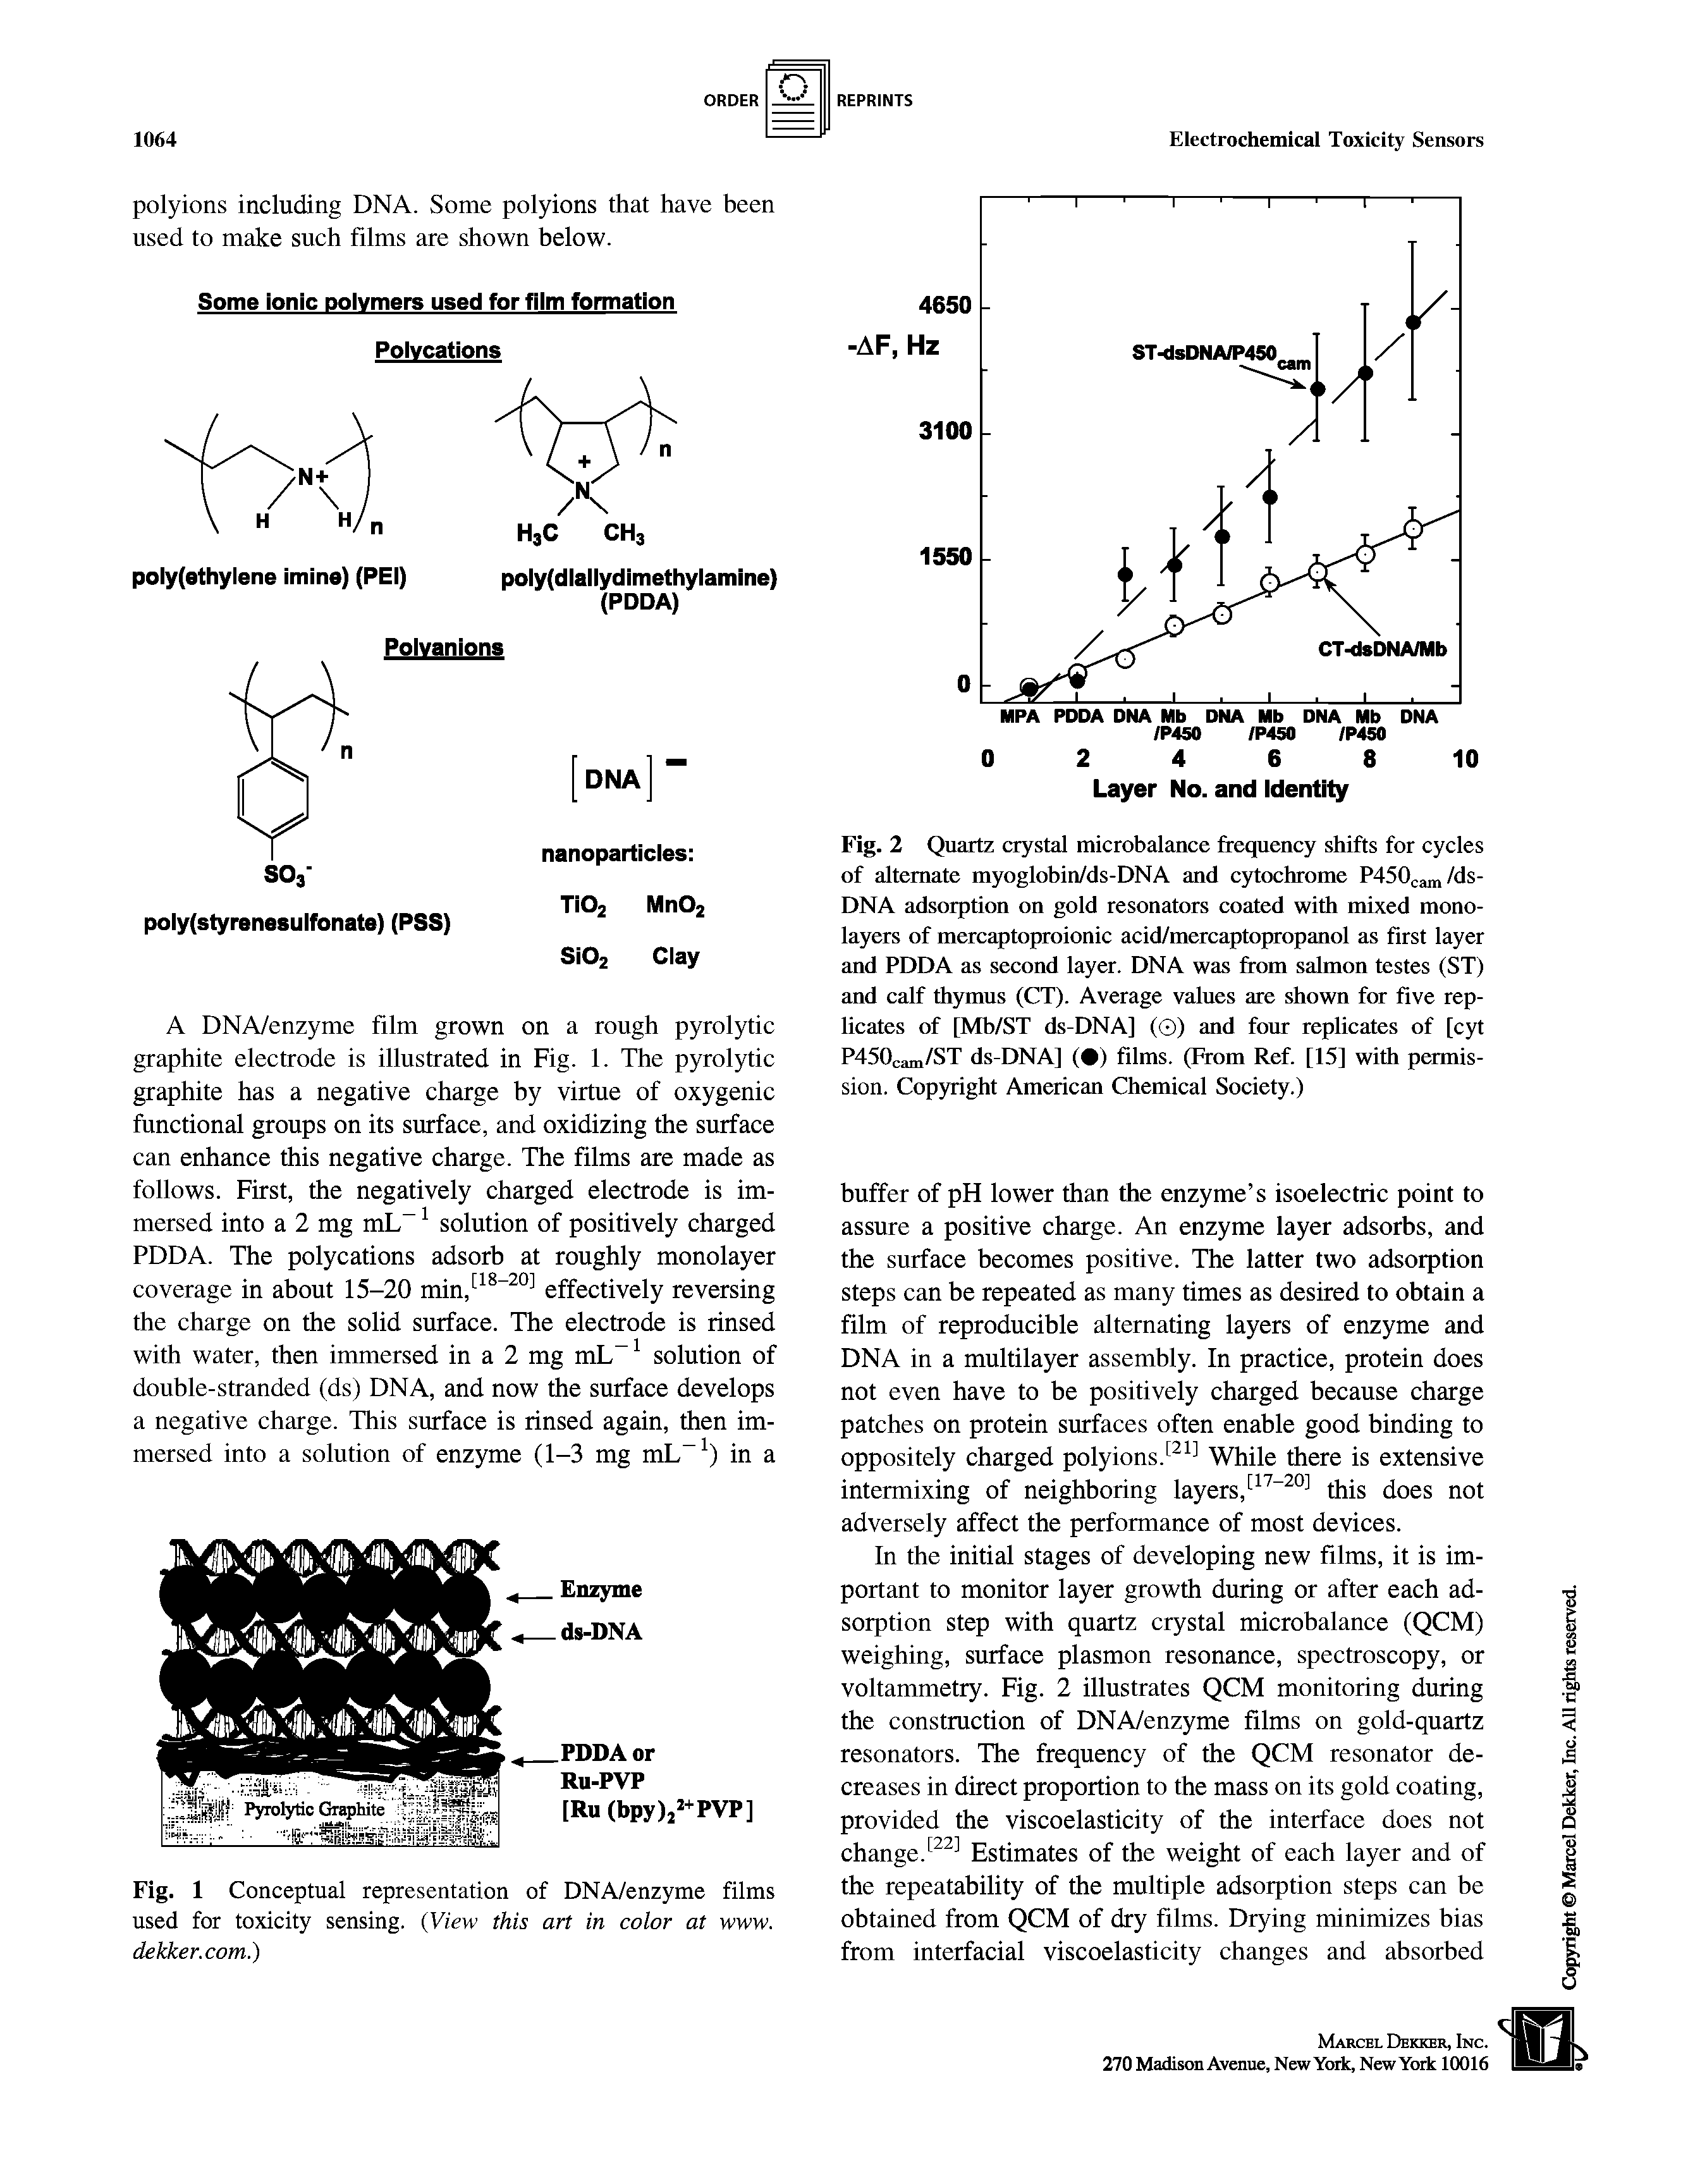 Fig. 2 Quartz crystal microbalance frequency shifts for cycles of alternate myoglobin/ds-DNA and cytochrome P450cam/ds-DNA adsorption on gold resonators coated with mixed mono-layers of mercaptoproionic acid/mercaptopropanol as first layer and PDDA as second layer. DNA was from salmon testes (ST) and calf thymus (CT). Average values are shown for five replicates of [Mb/ST ds-DNA] (0) and four replicates of [cyt P450cam/ST ds-DNA] ( ) films. (From Ref. [15] with permission. Copyright American Chemical Society.)...